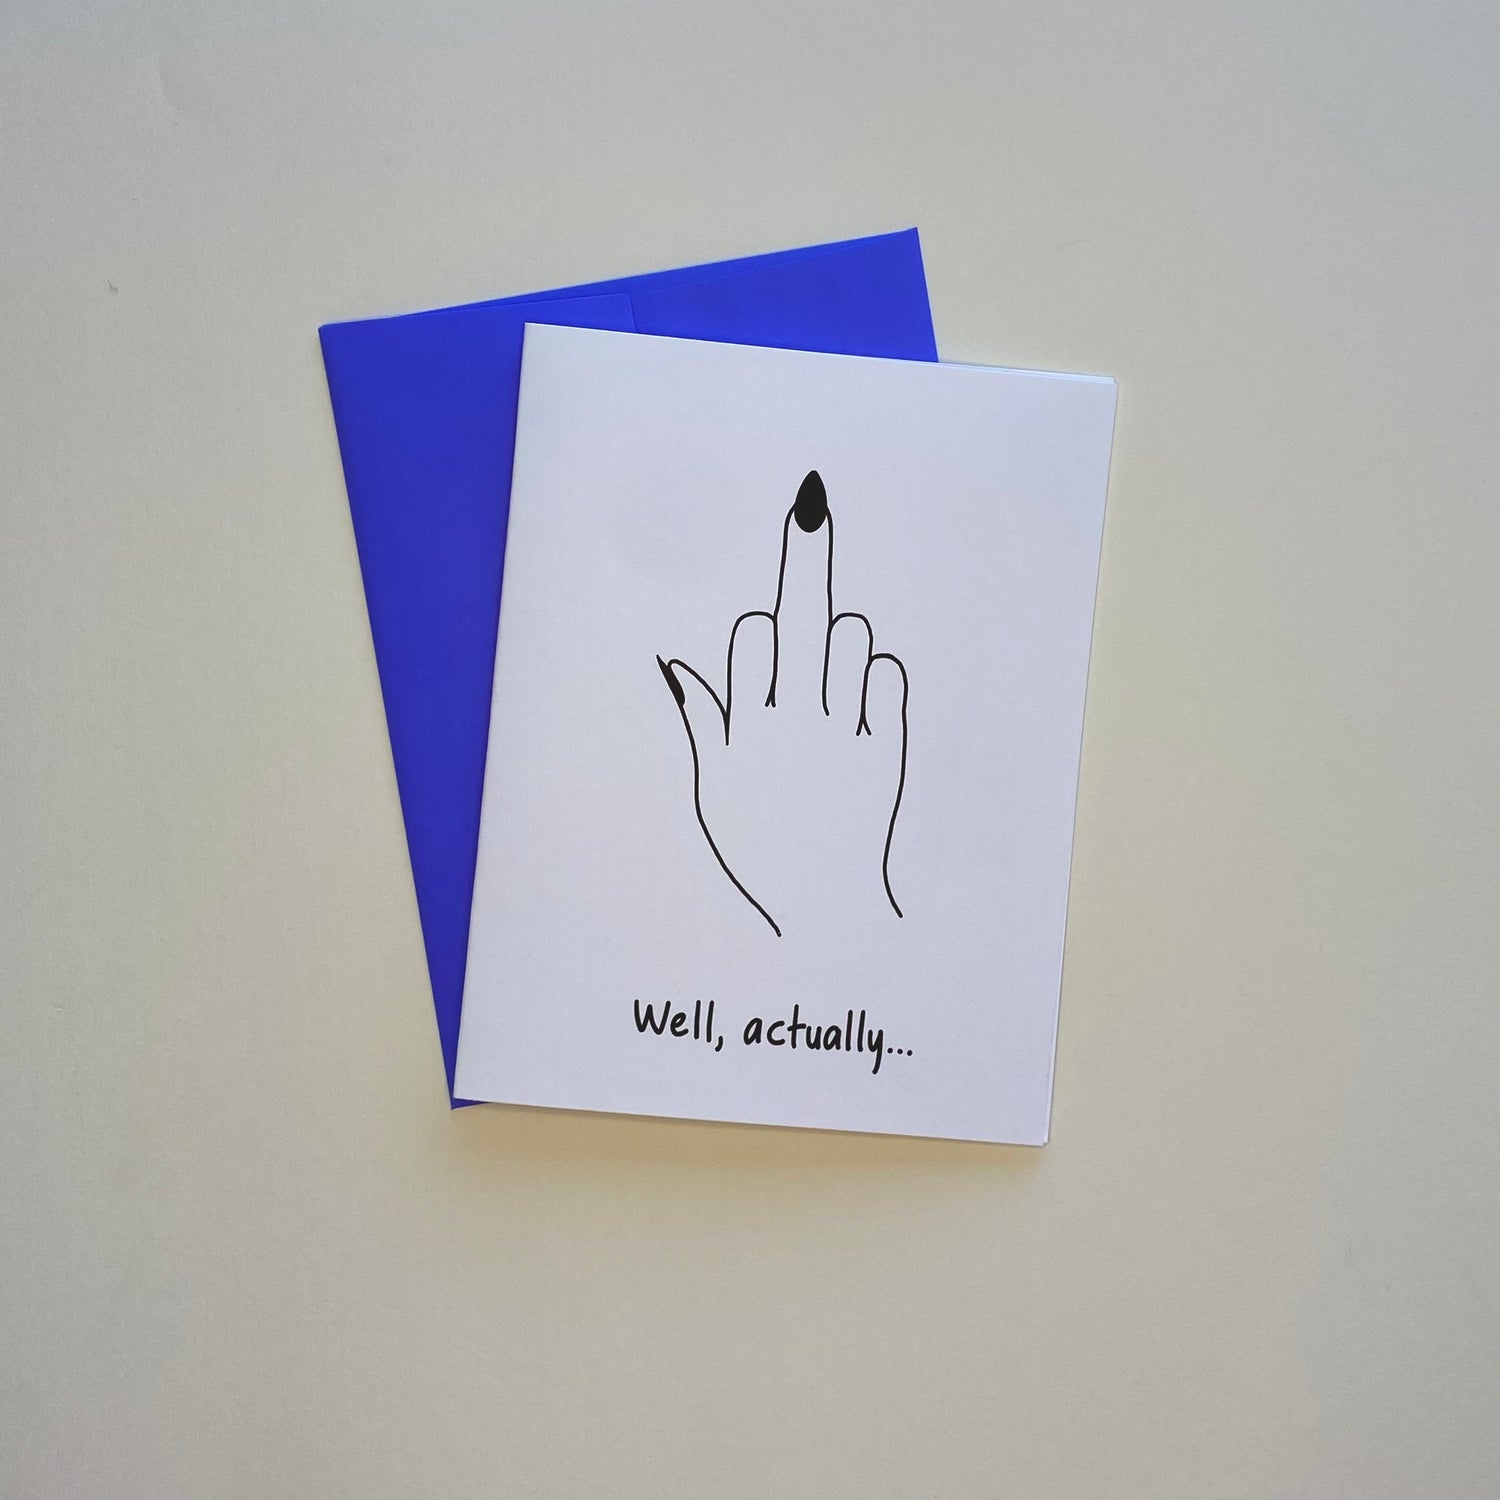 Greeting card showing a hand with the middle finger up and the words, "Well, actually..."